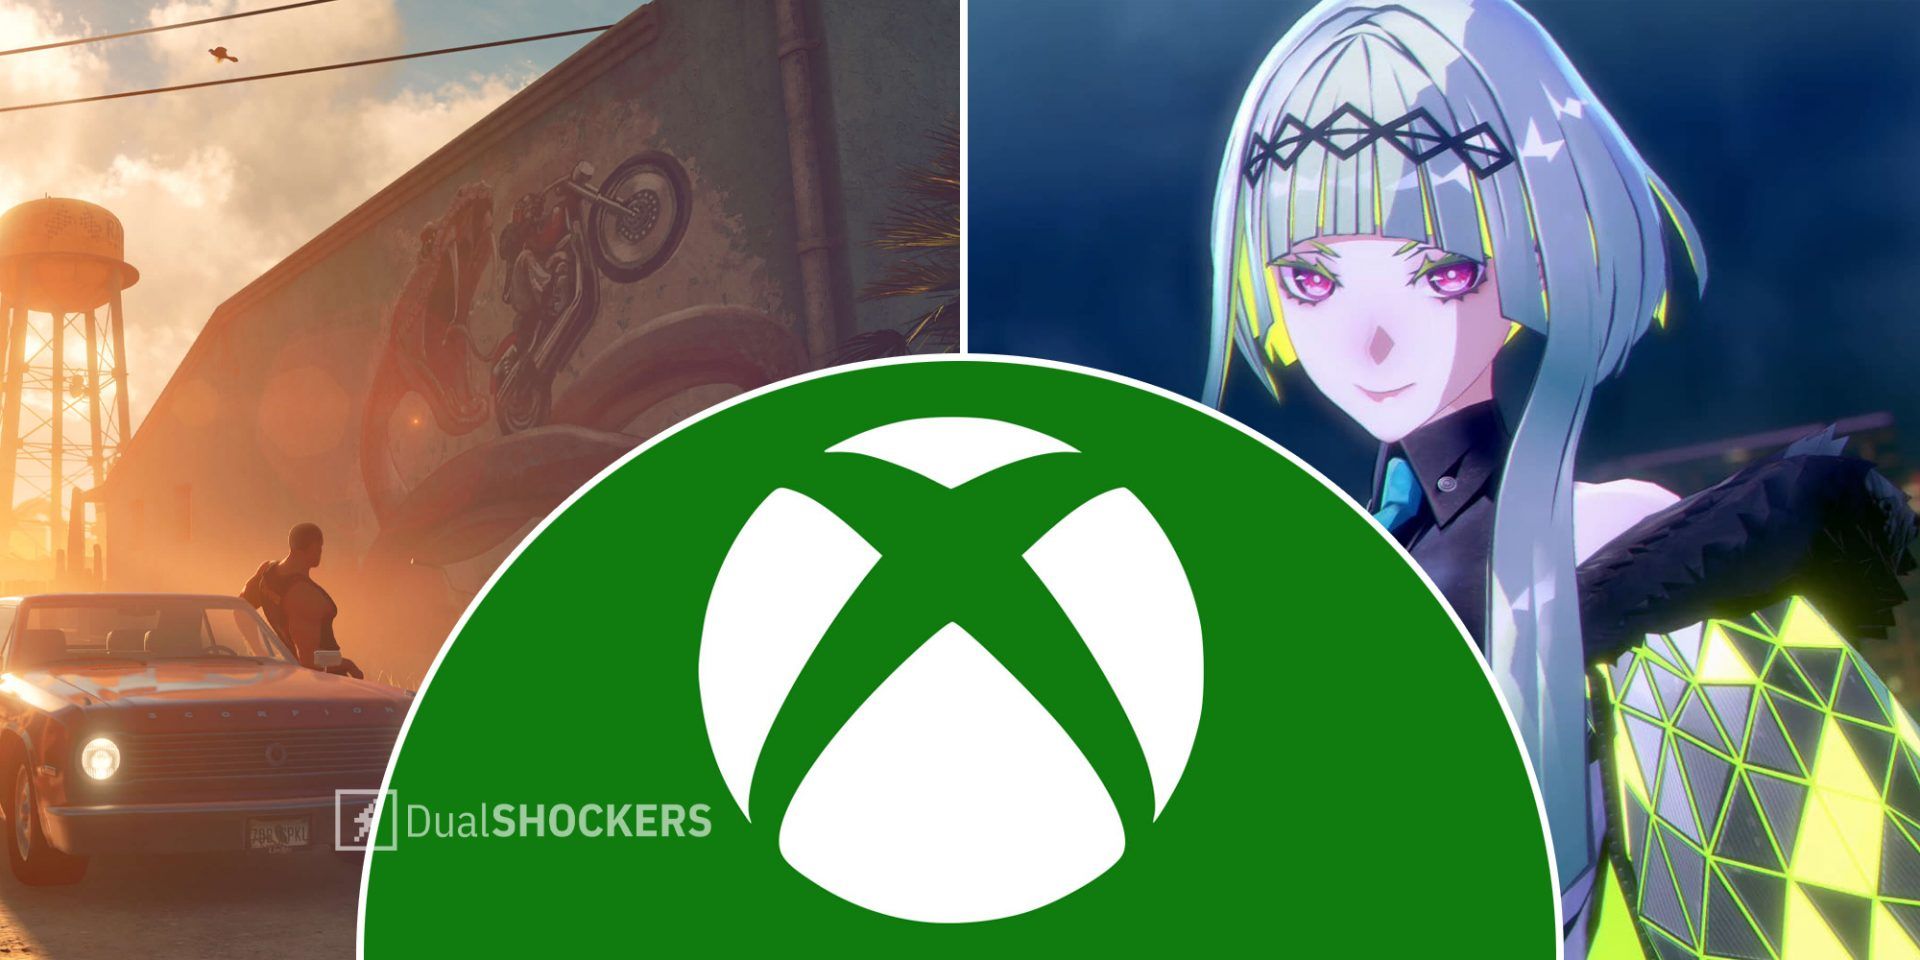 Xbox games Saints Row 2022 on left, Xbox logo in middle, Soul Hackers 2 on right